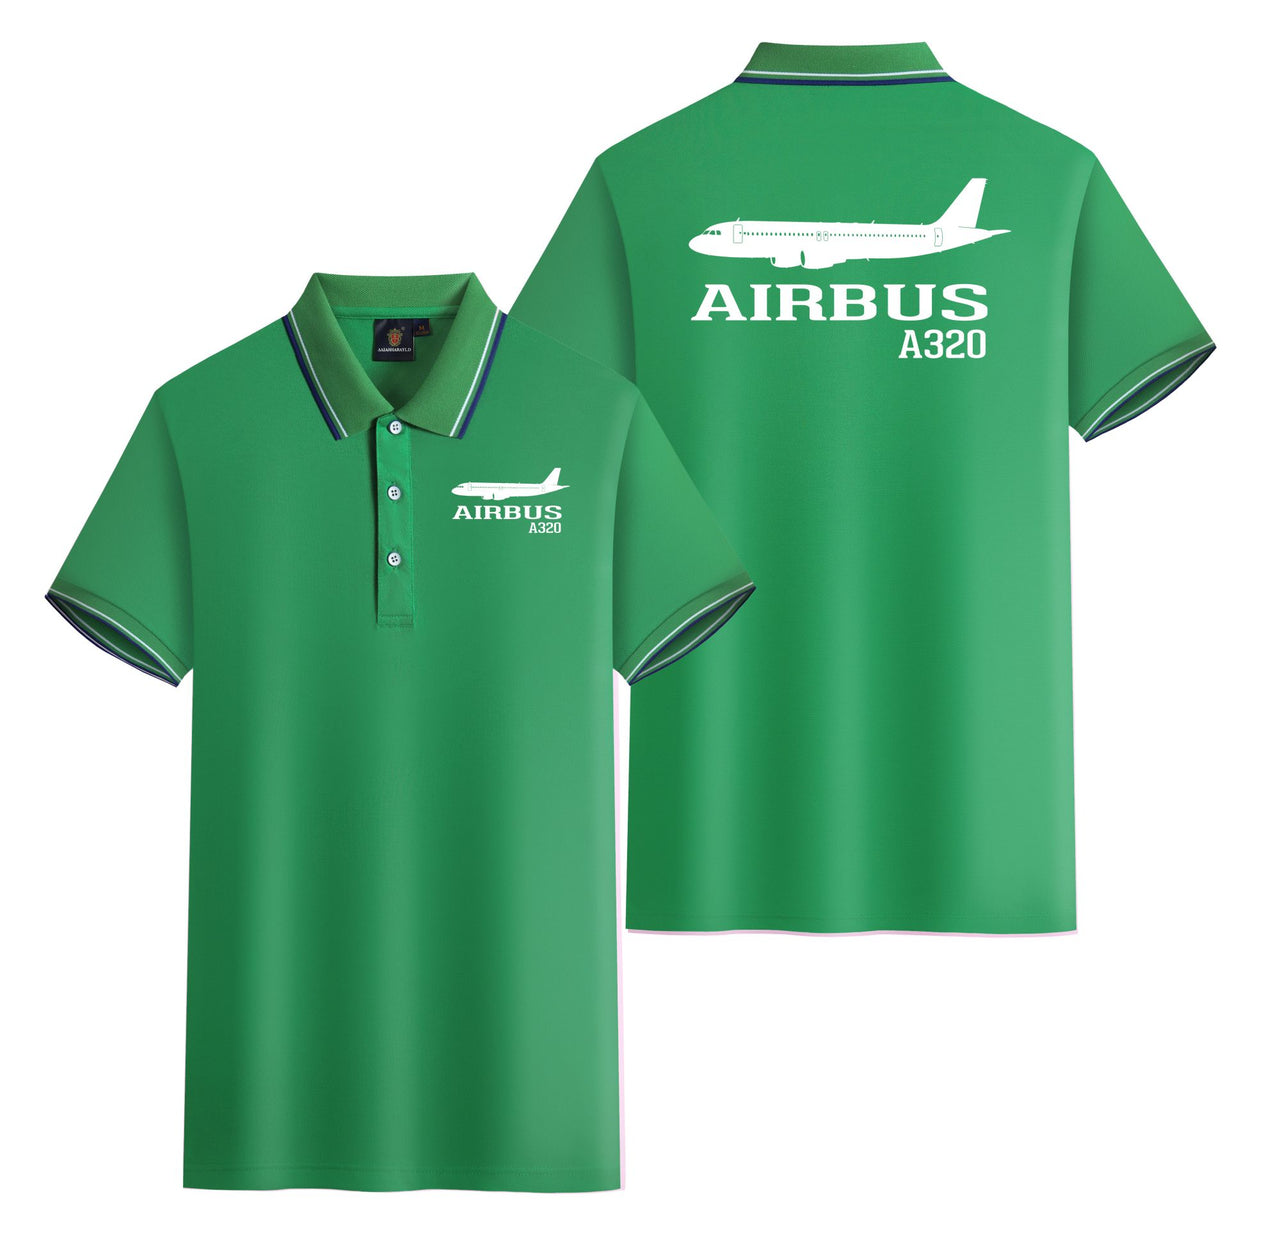 Airbus A320 Printed Designed Stylish Polo T-Shirts (Double-Side)